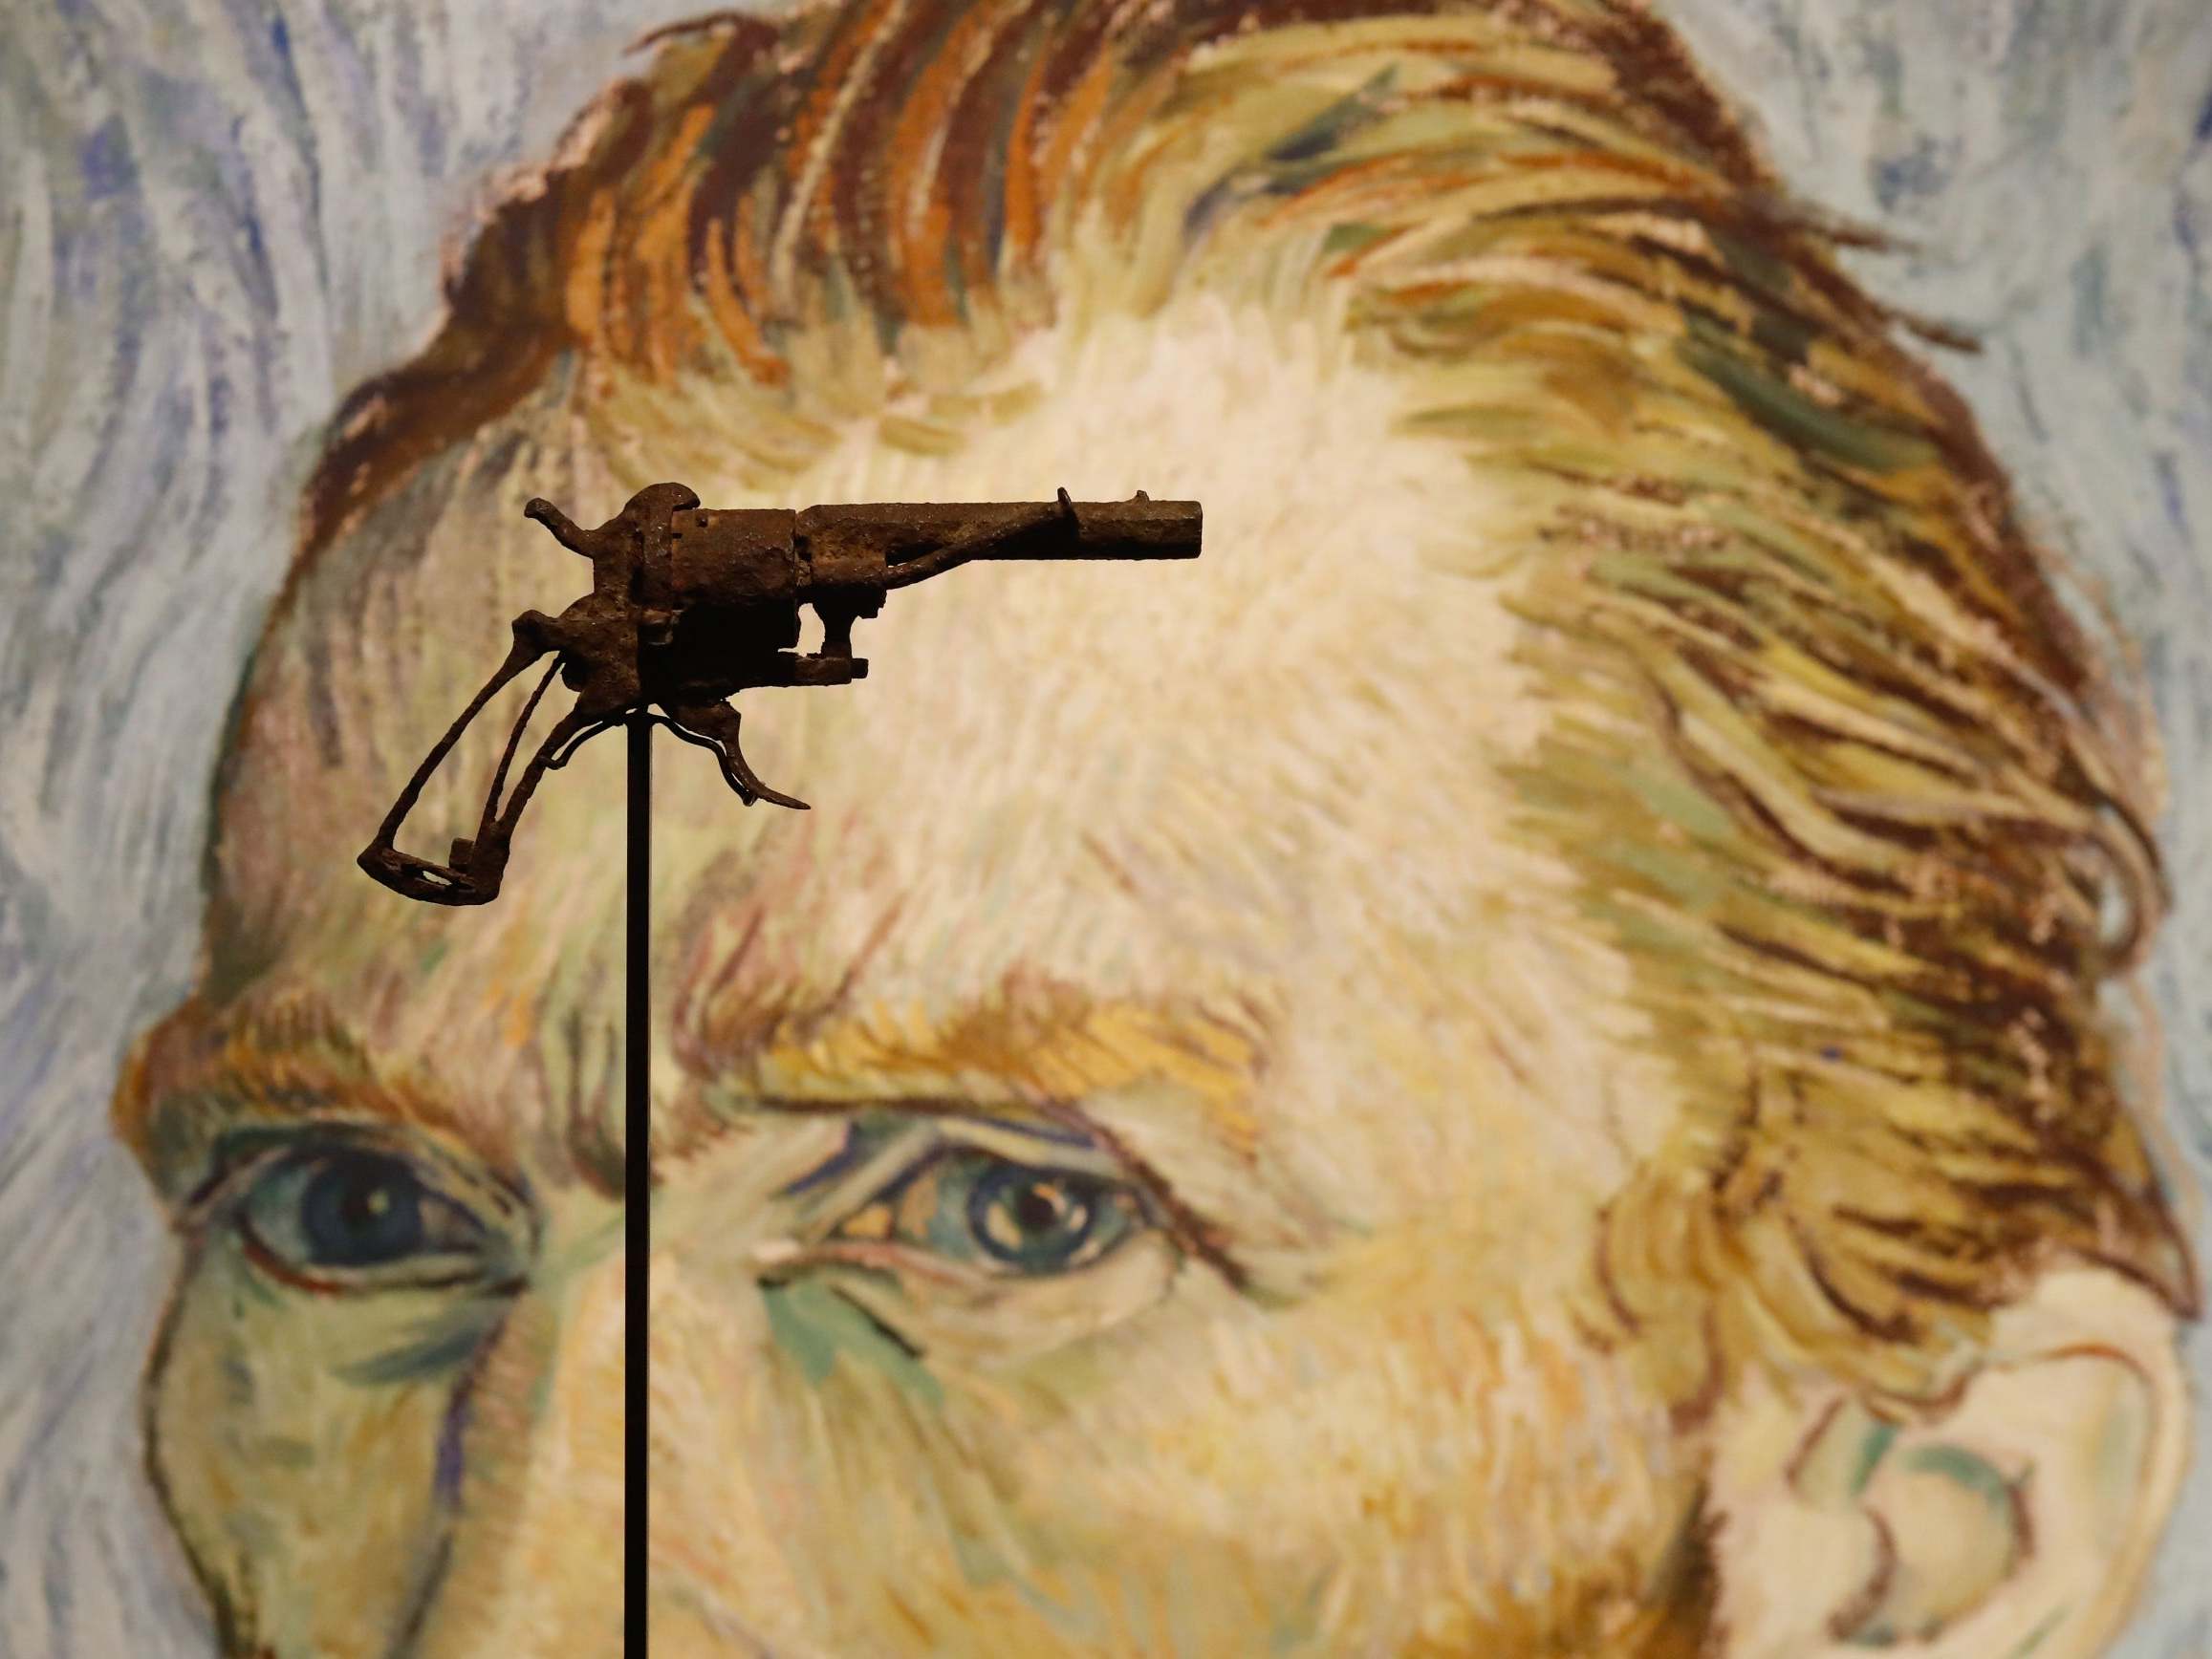 Revolver painter used to kill himself on public display at auction house